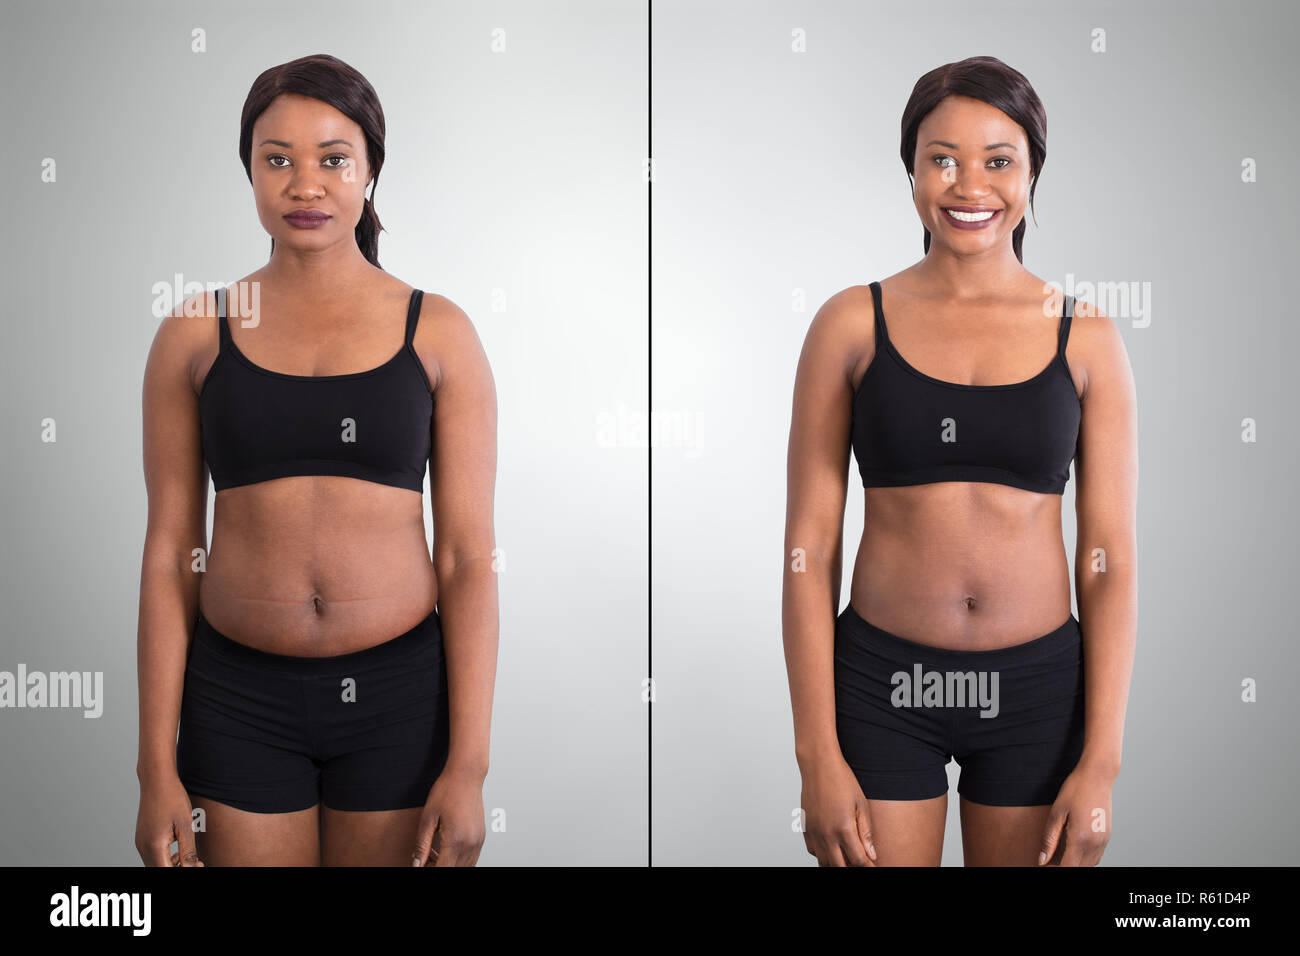 Before And After Concept Showing Fat To Slim Woman Stock Photo - Alamy